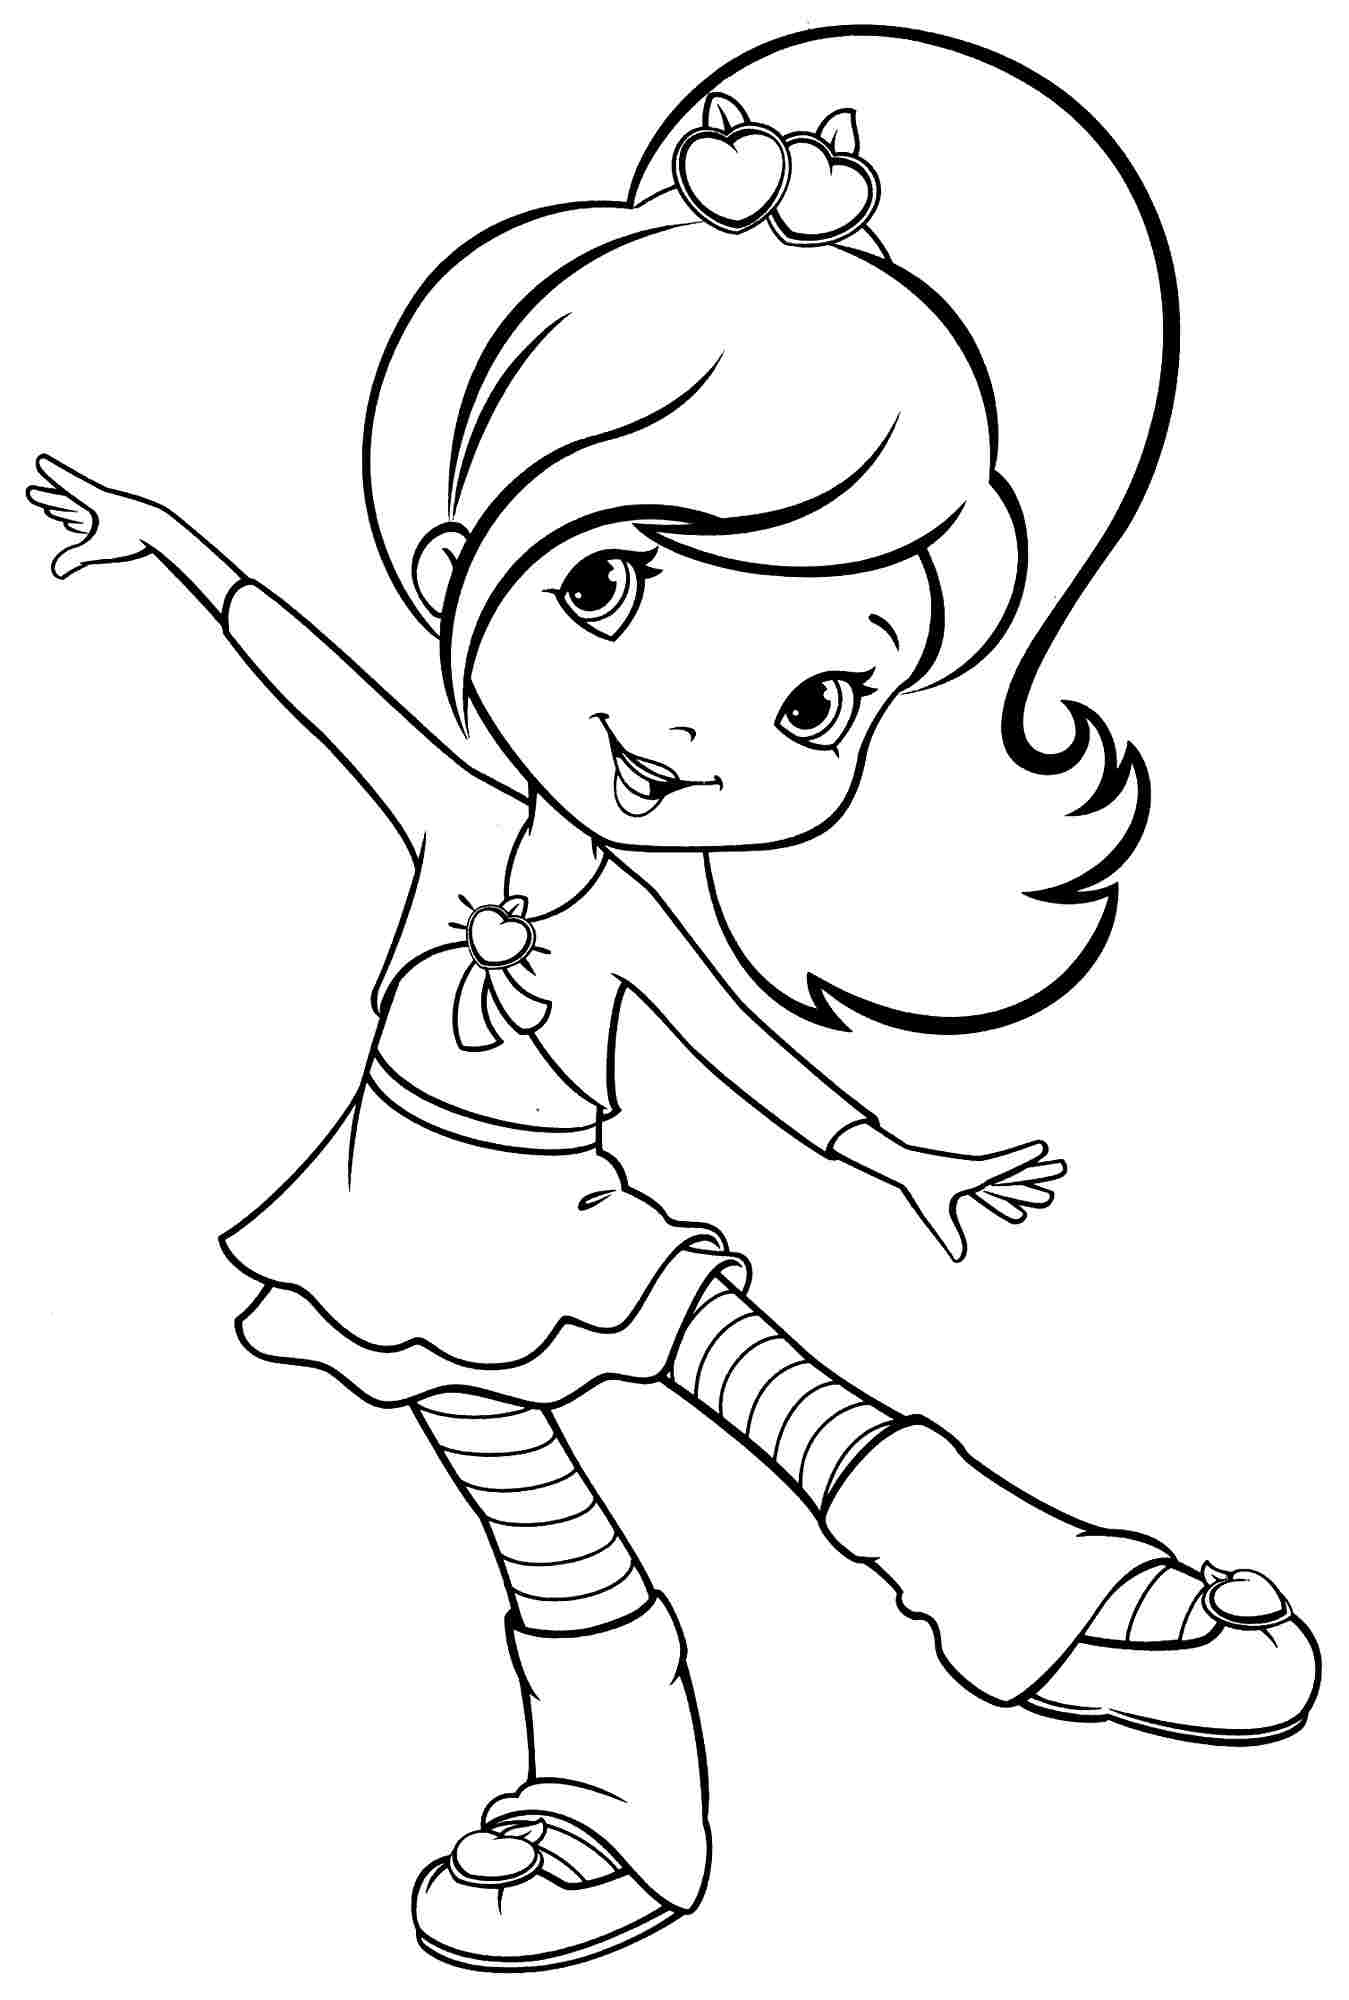 coloring-pages-for-girls-best-coloring-pages-for-kids